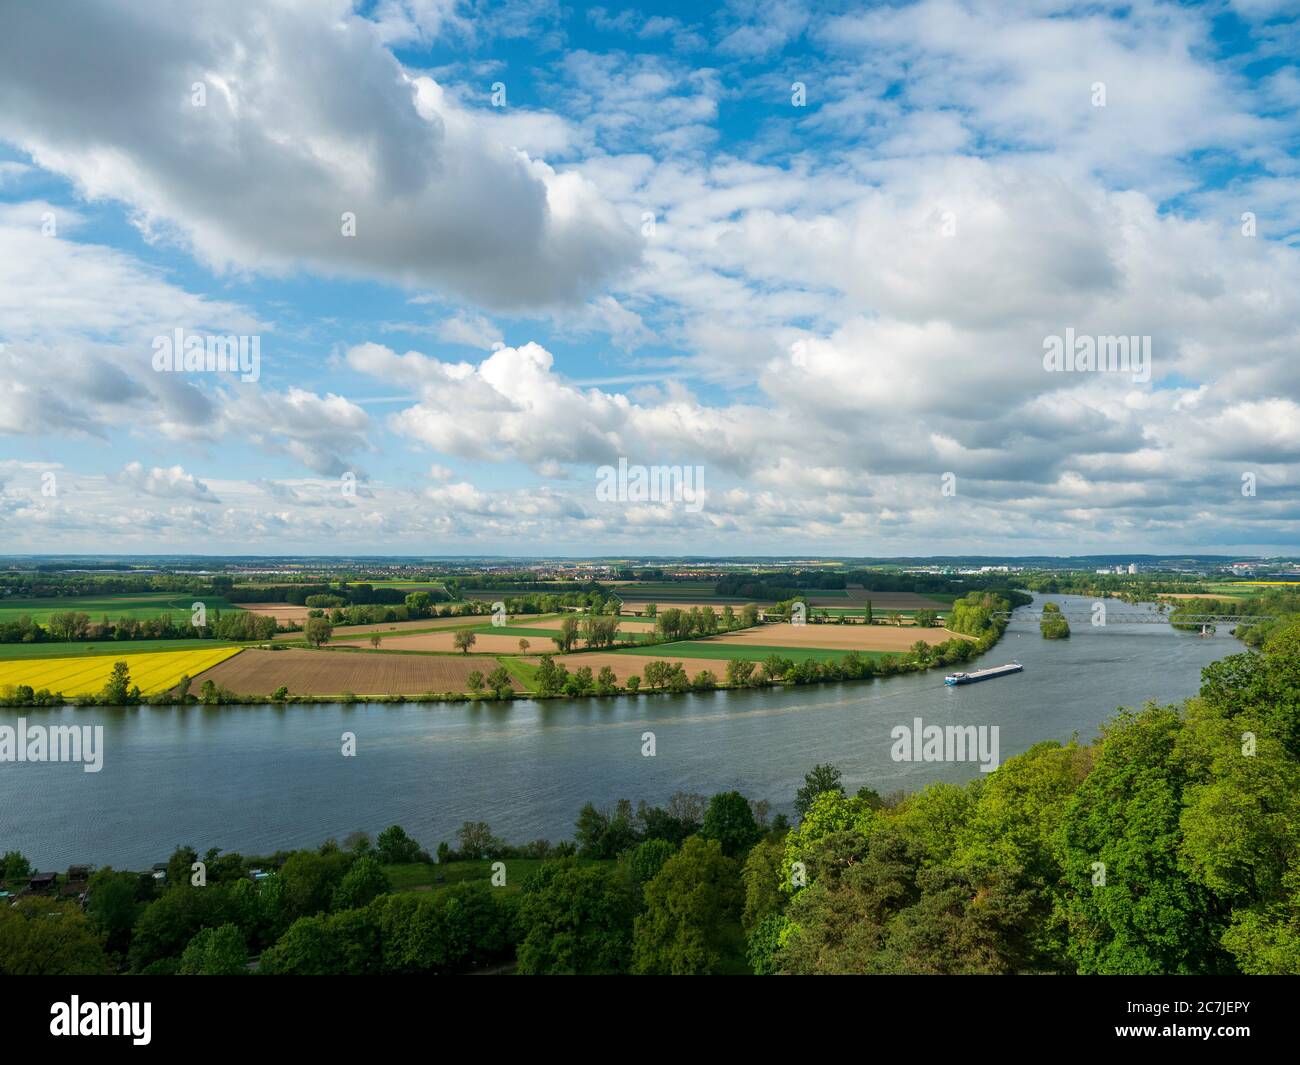 View from the Walhalla to the Danube, Bavaria, Germany Stock Photo